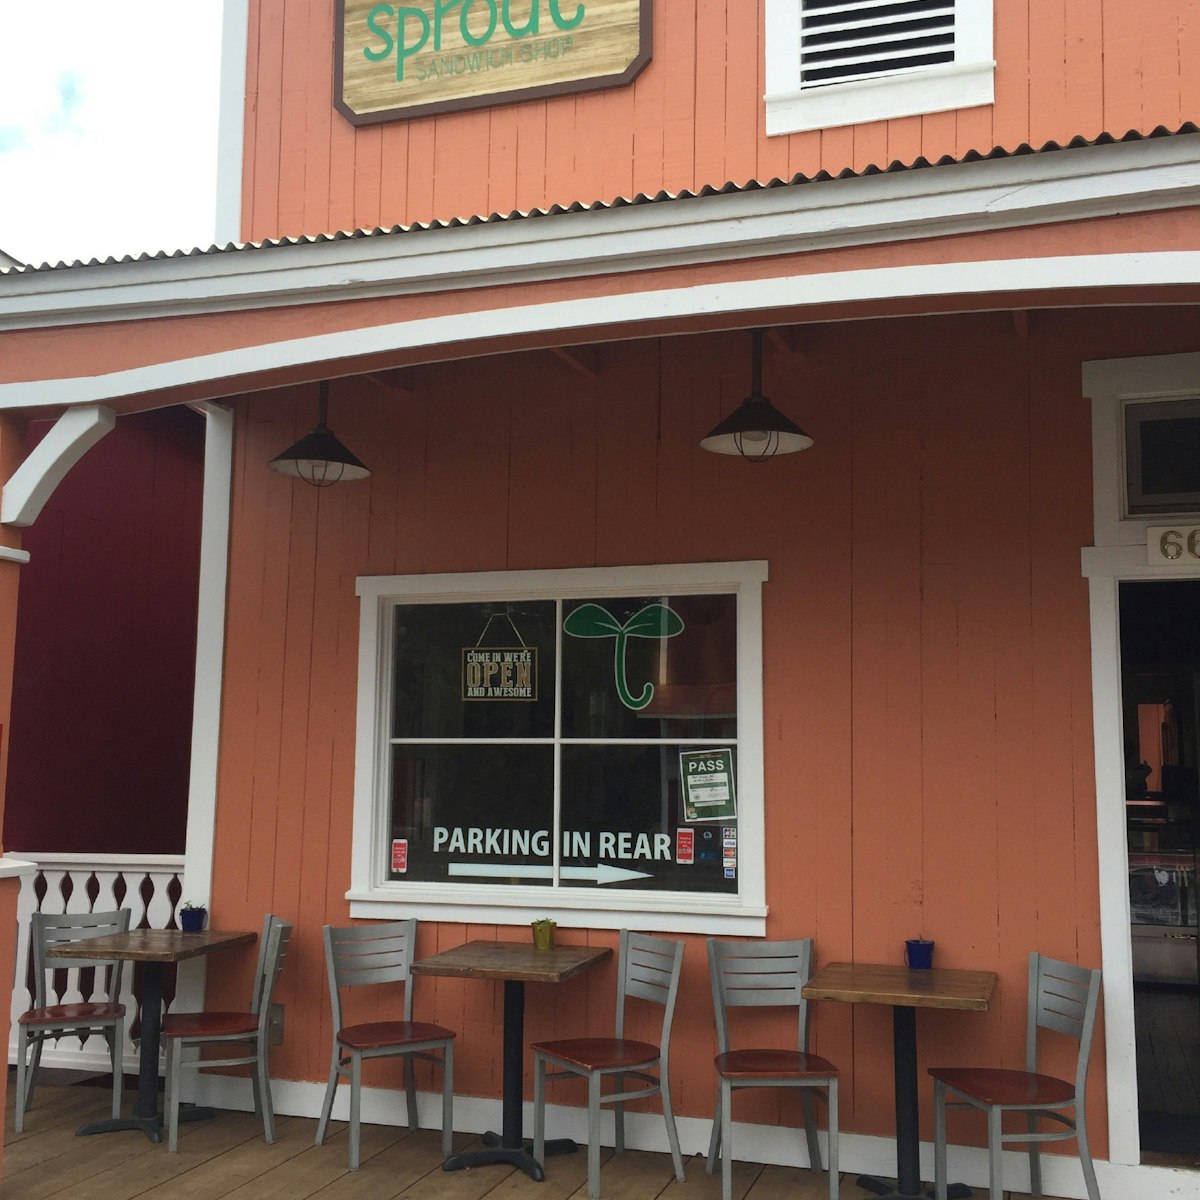 Exterior of Sprout Sandwich Shop restaurant in Hale'iwa, O'ahu, Hawaii